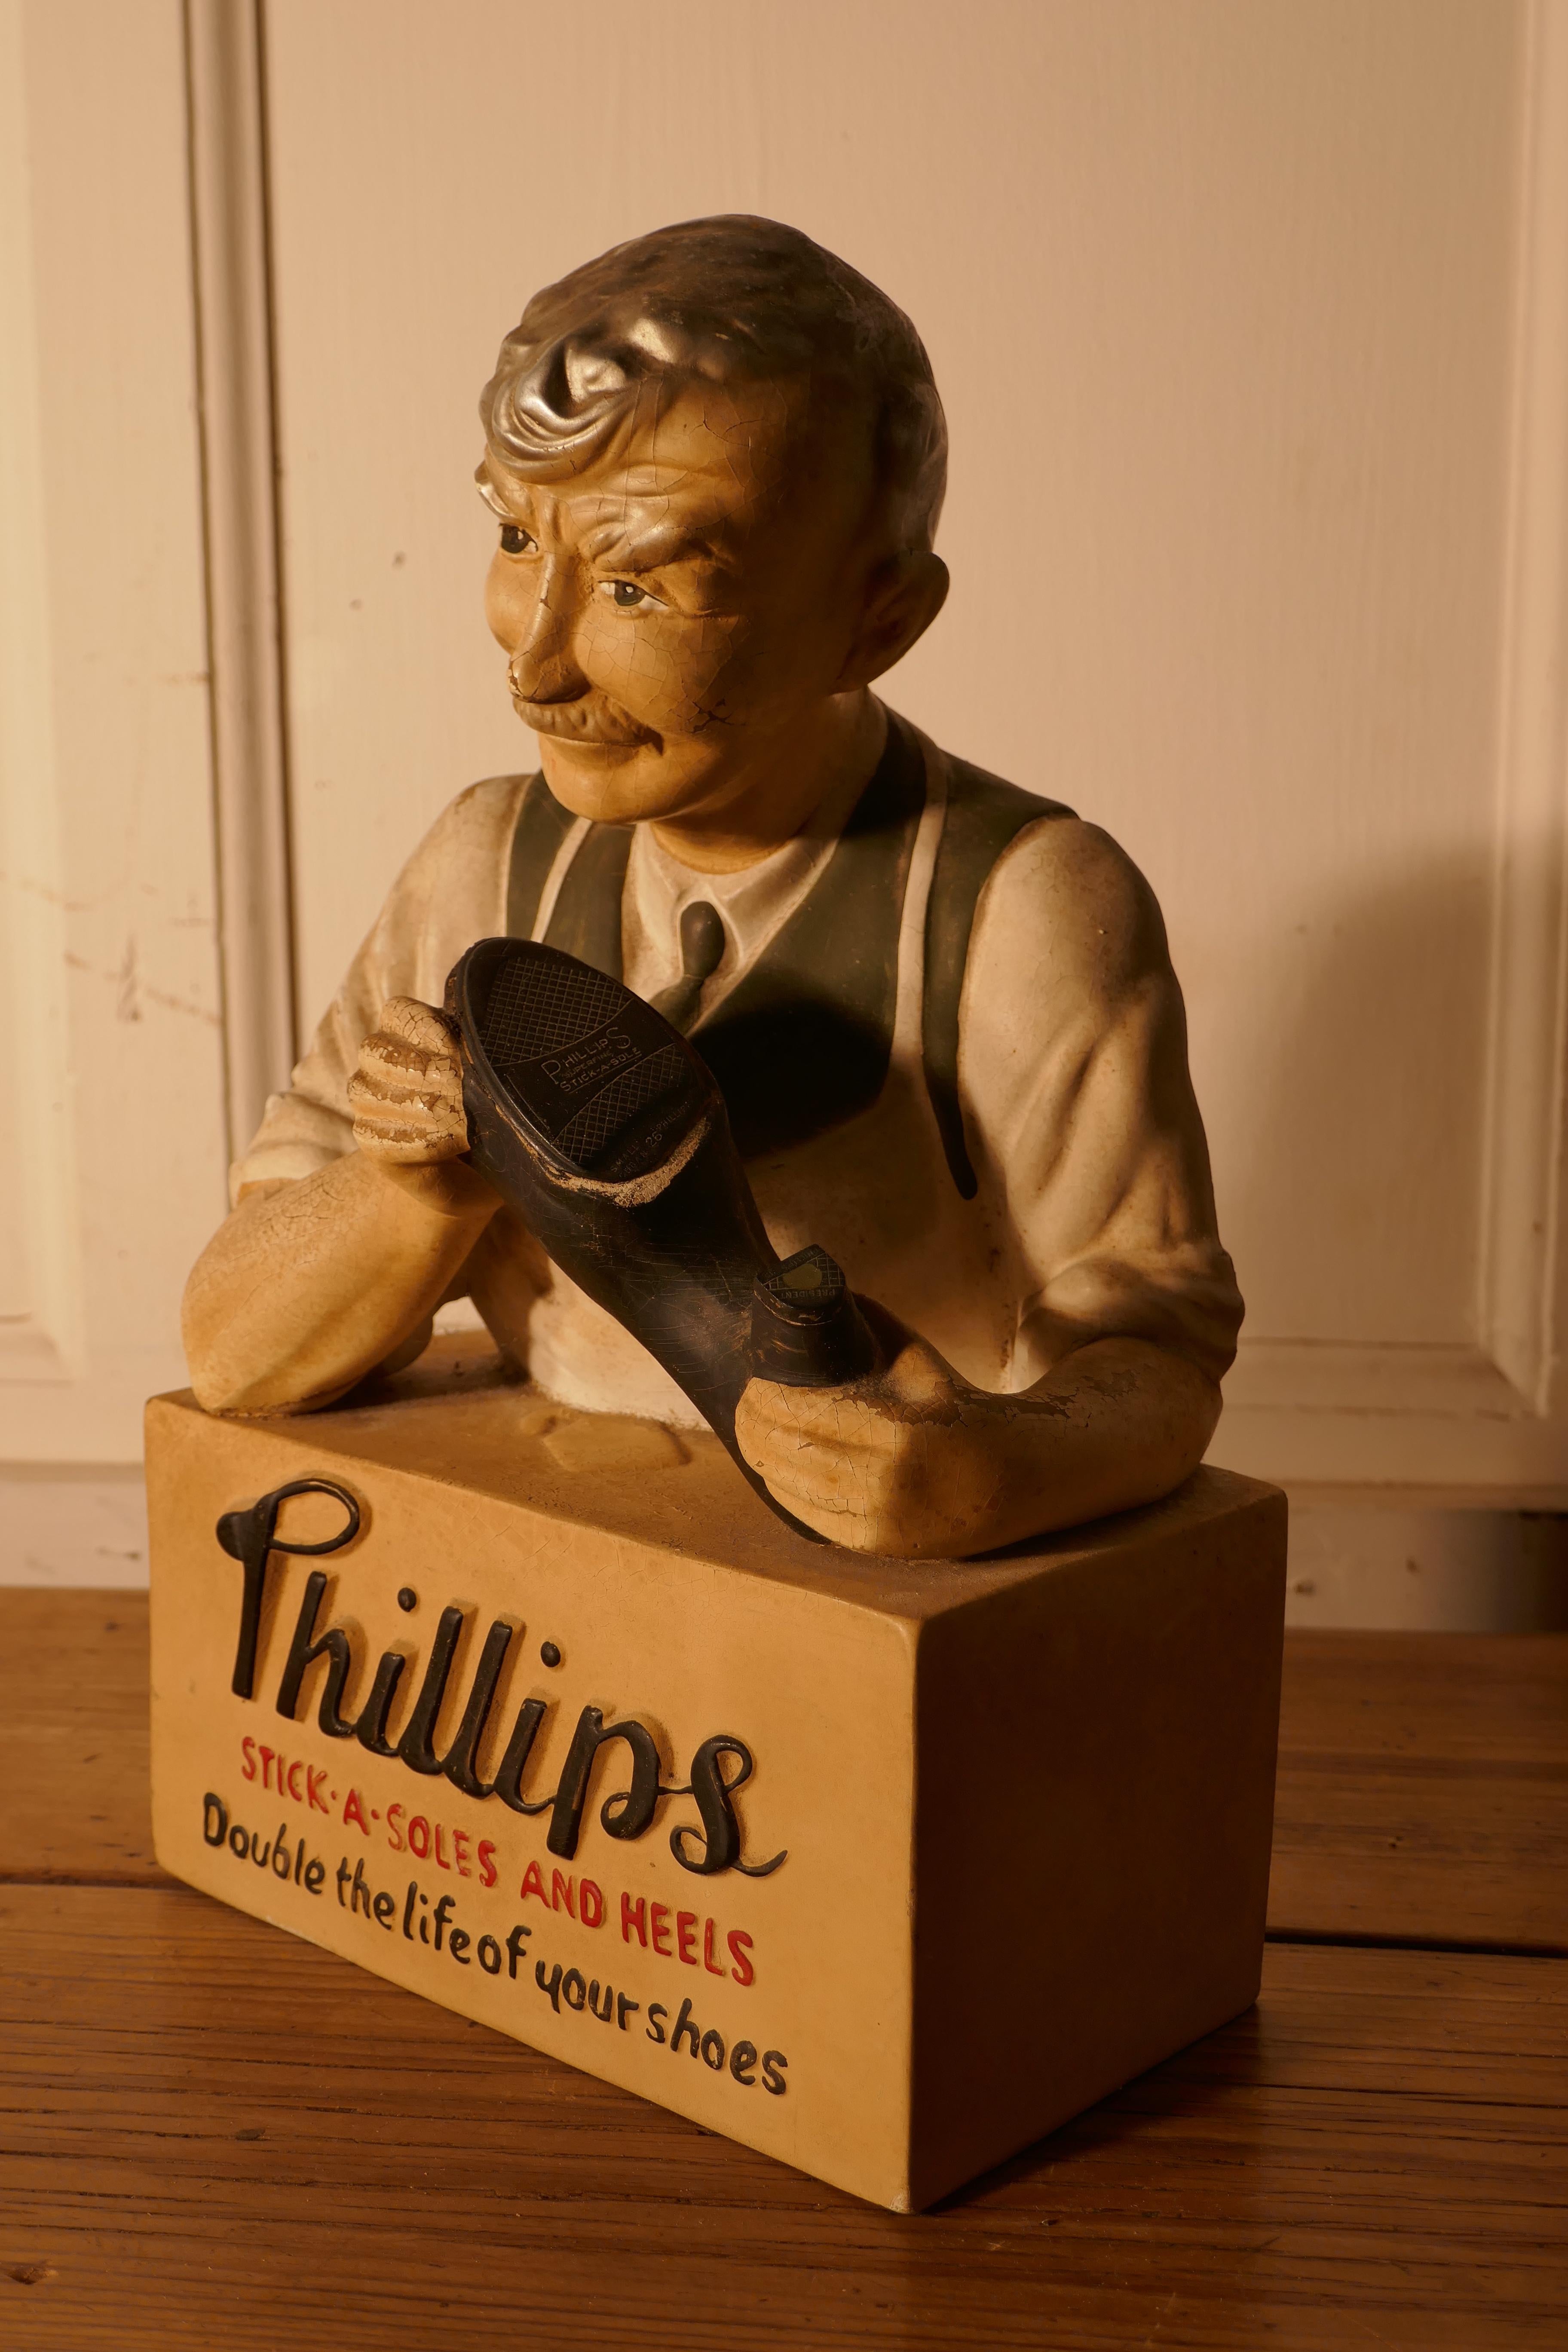 Phillips Stick a Soles and Heels Cobblers Shop Advertising Display Model For Sale 2